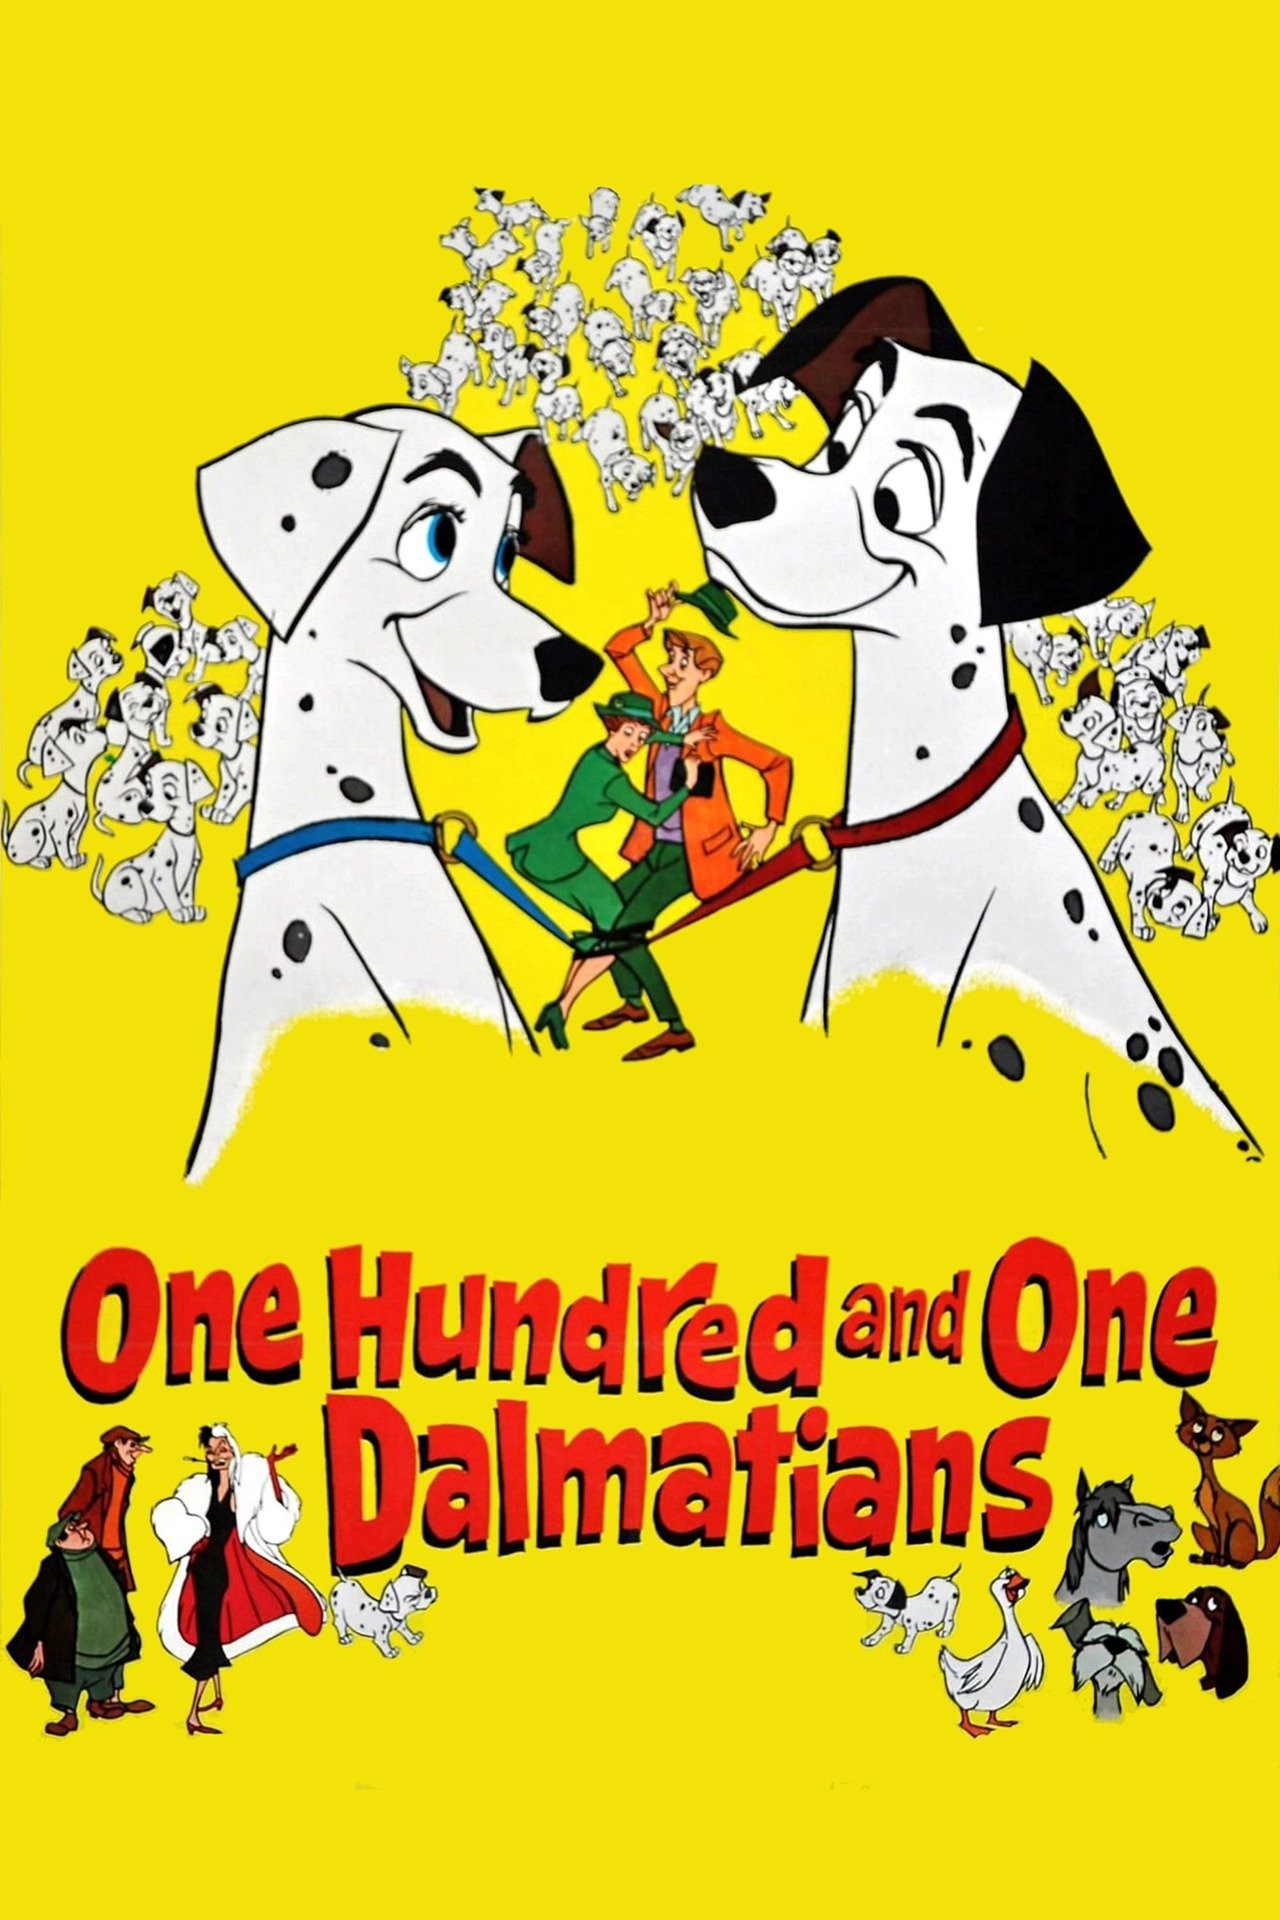 101 Dalmatians A Disney Read-Along by - Disney, One Hundred and